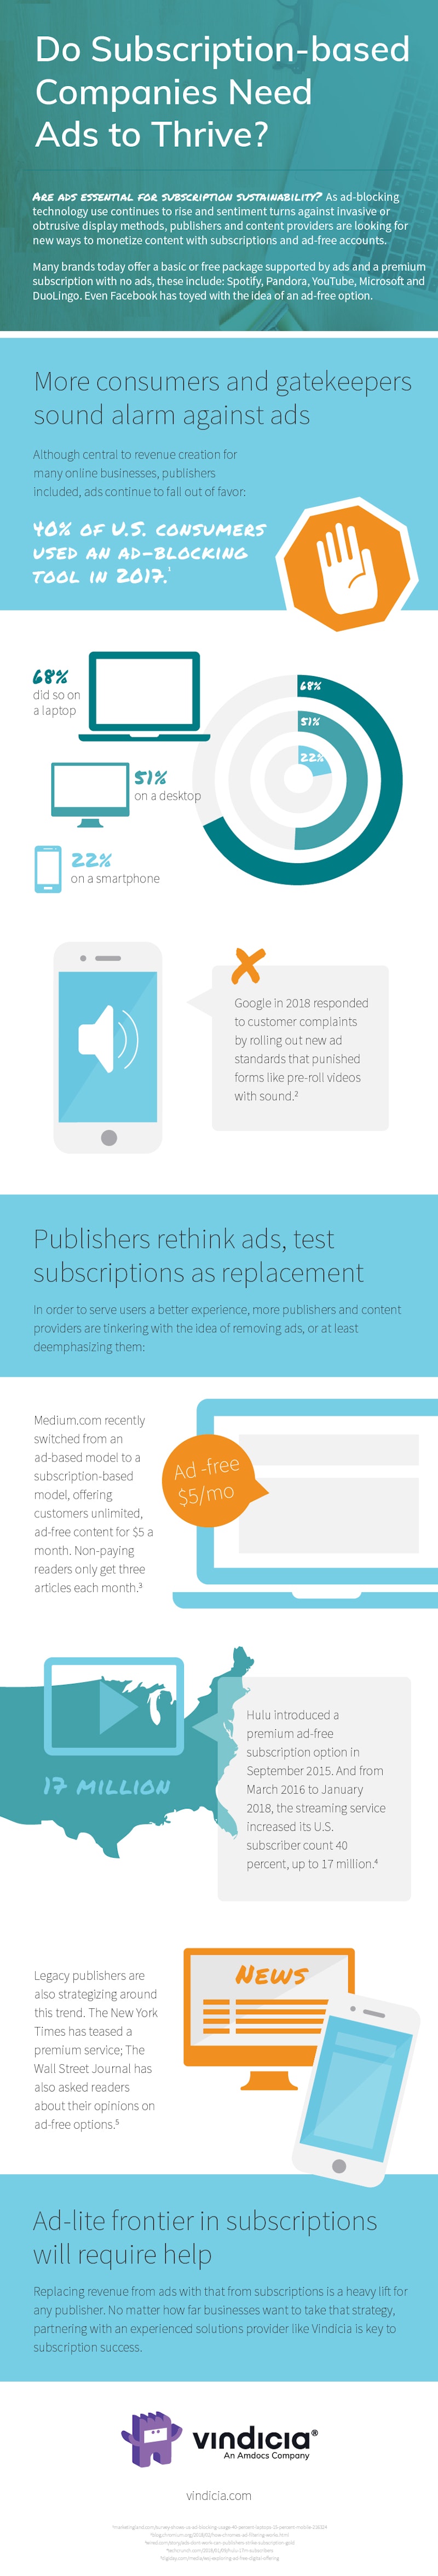 Do Subscription-based Companies Need Ads to Thrive?